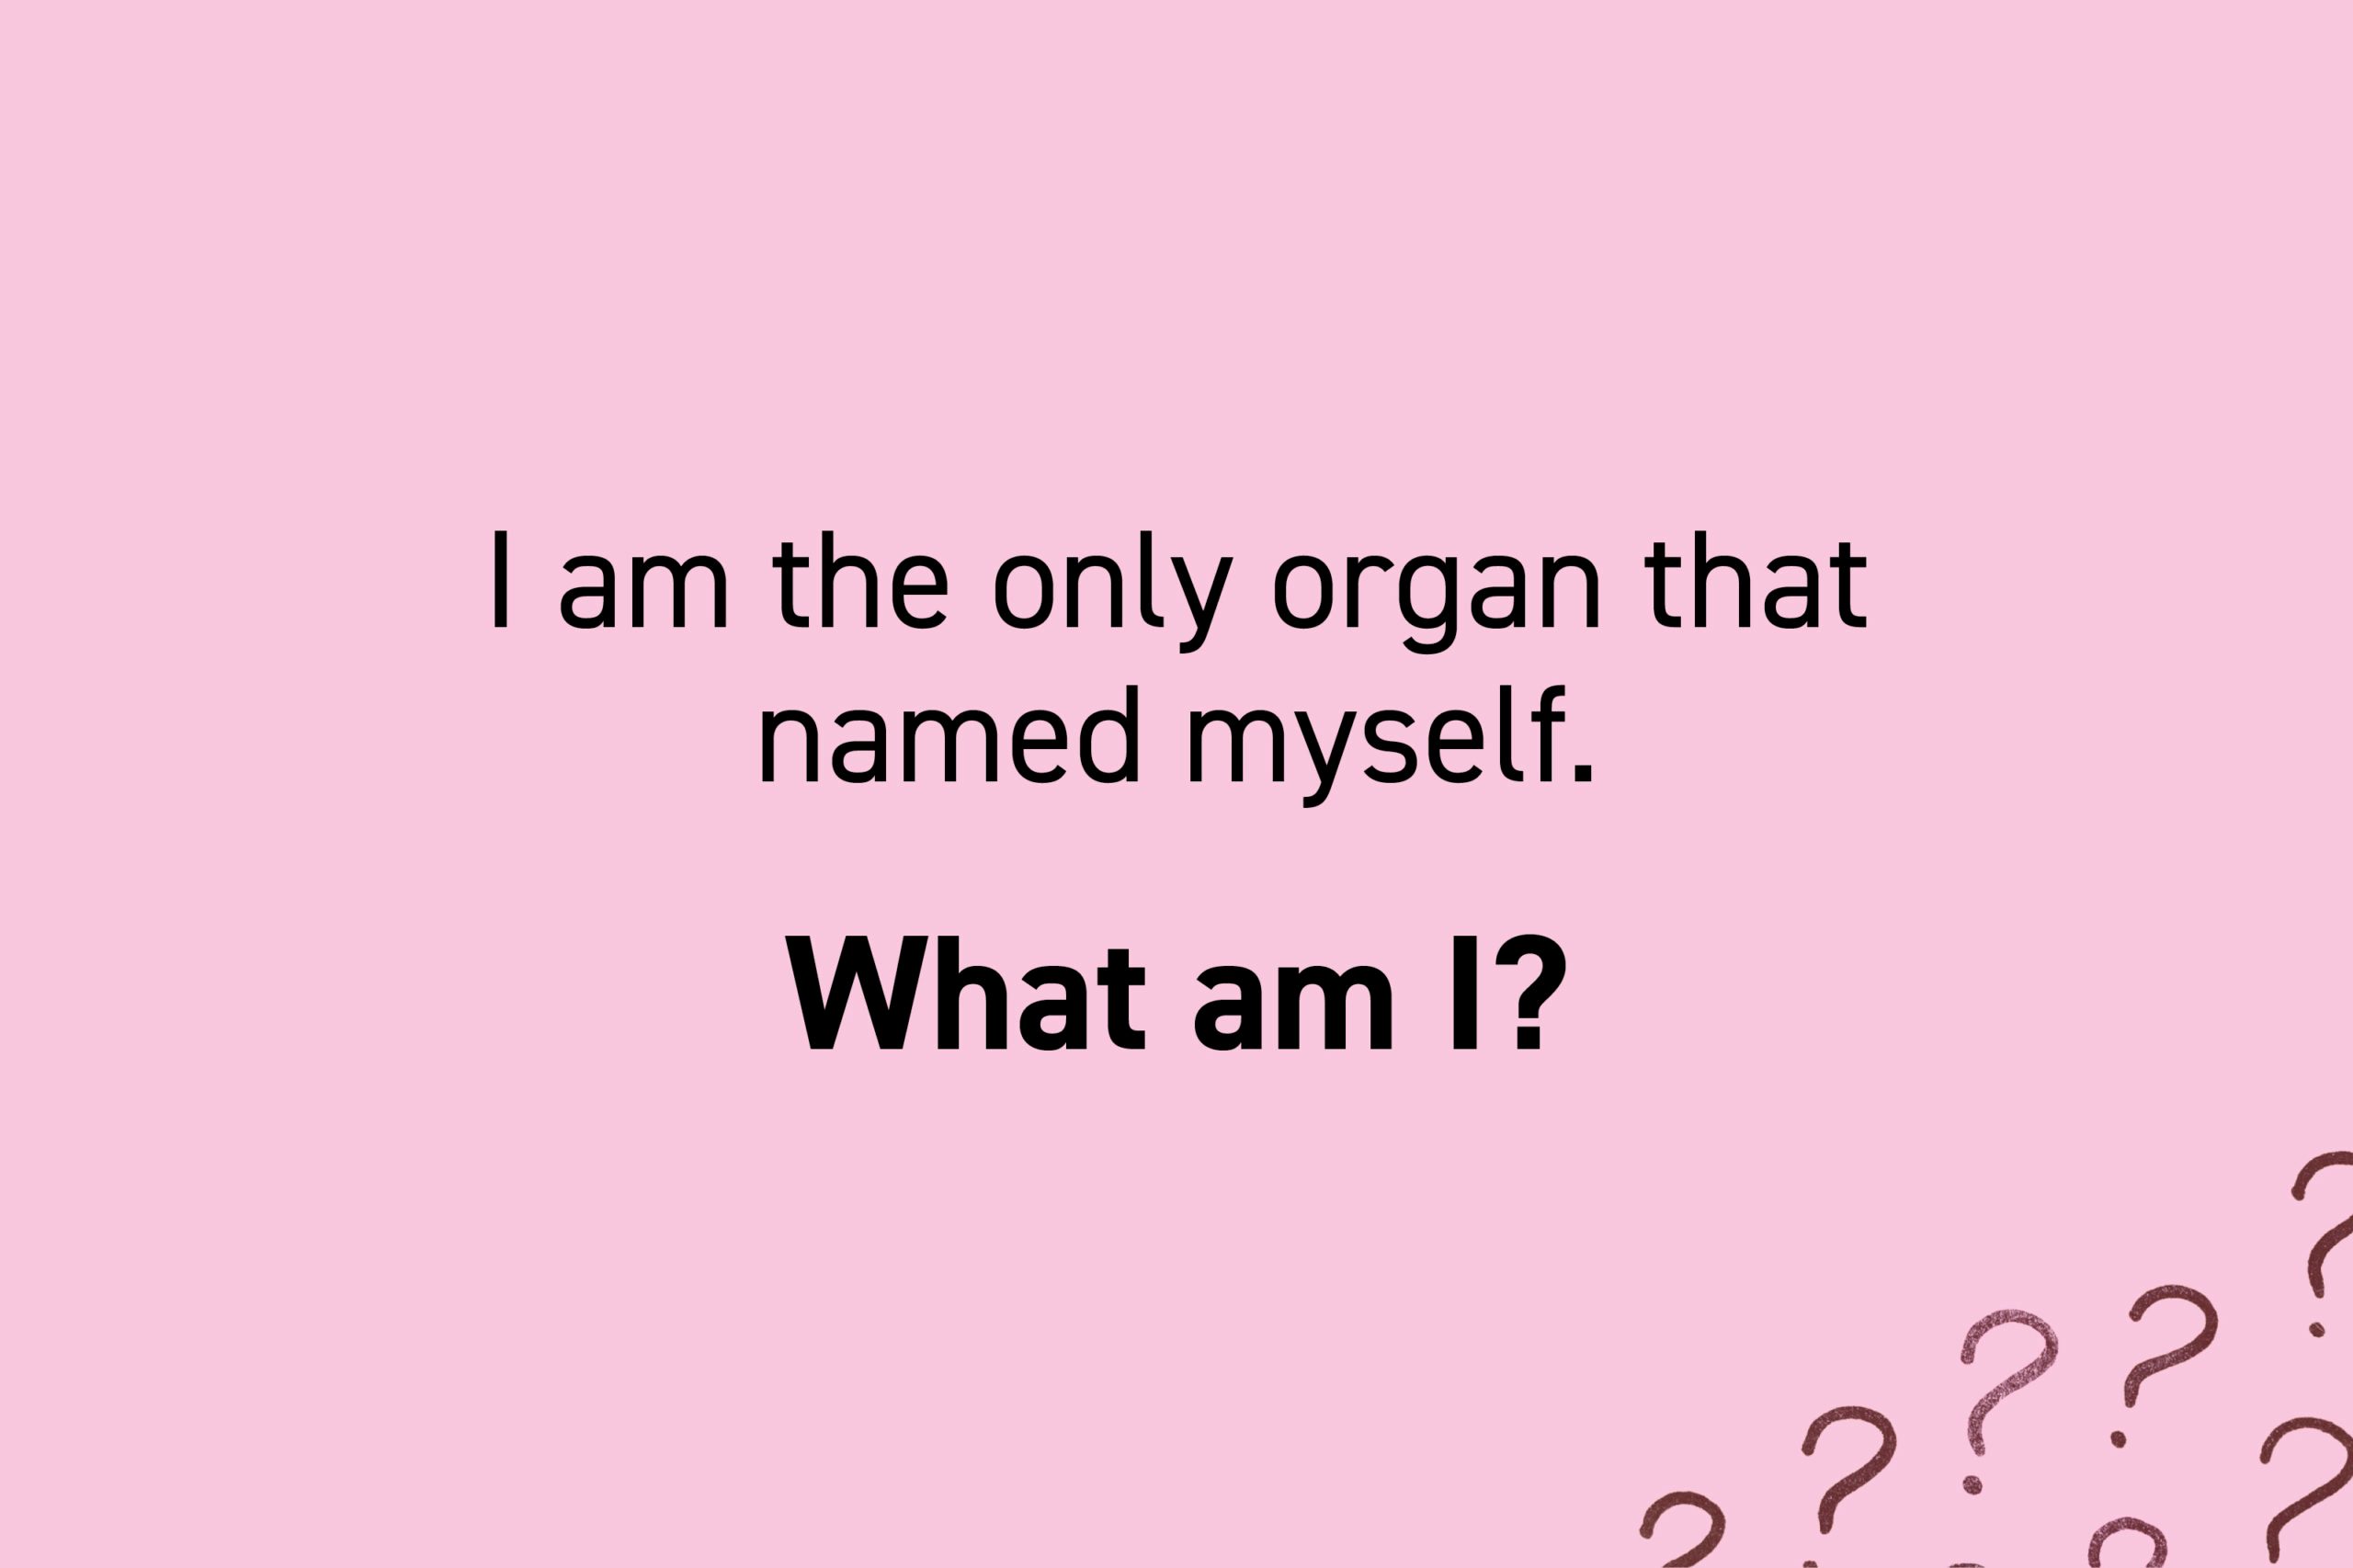 I am the only organ that named myself. What am I?